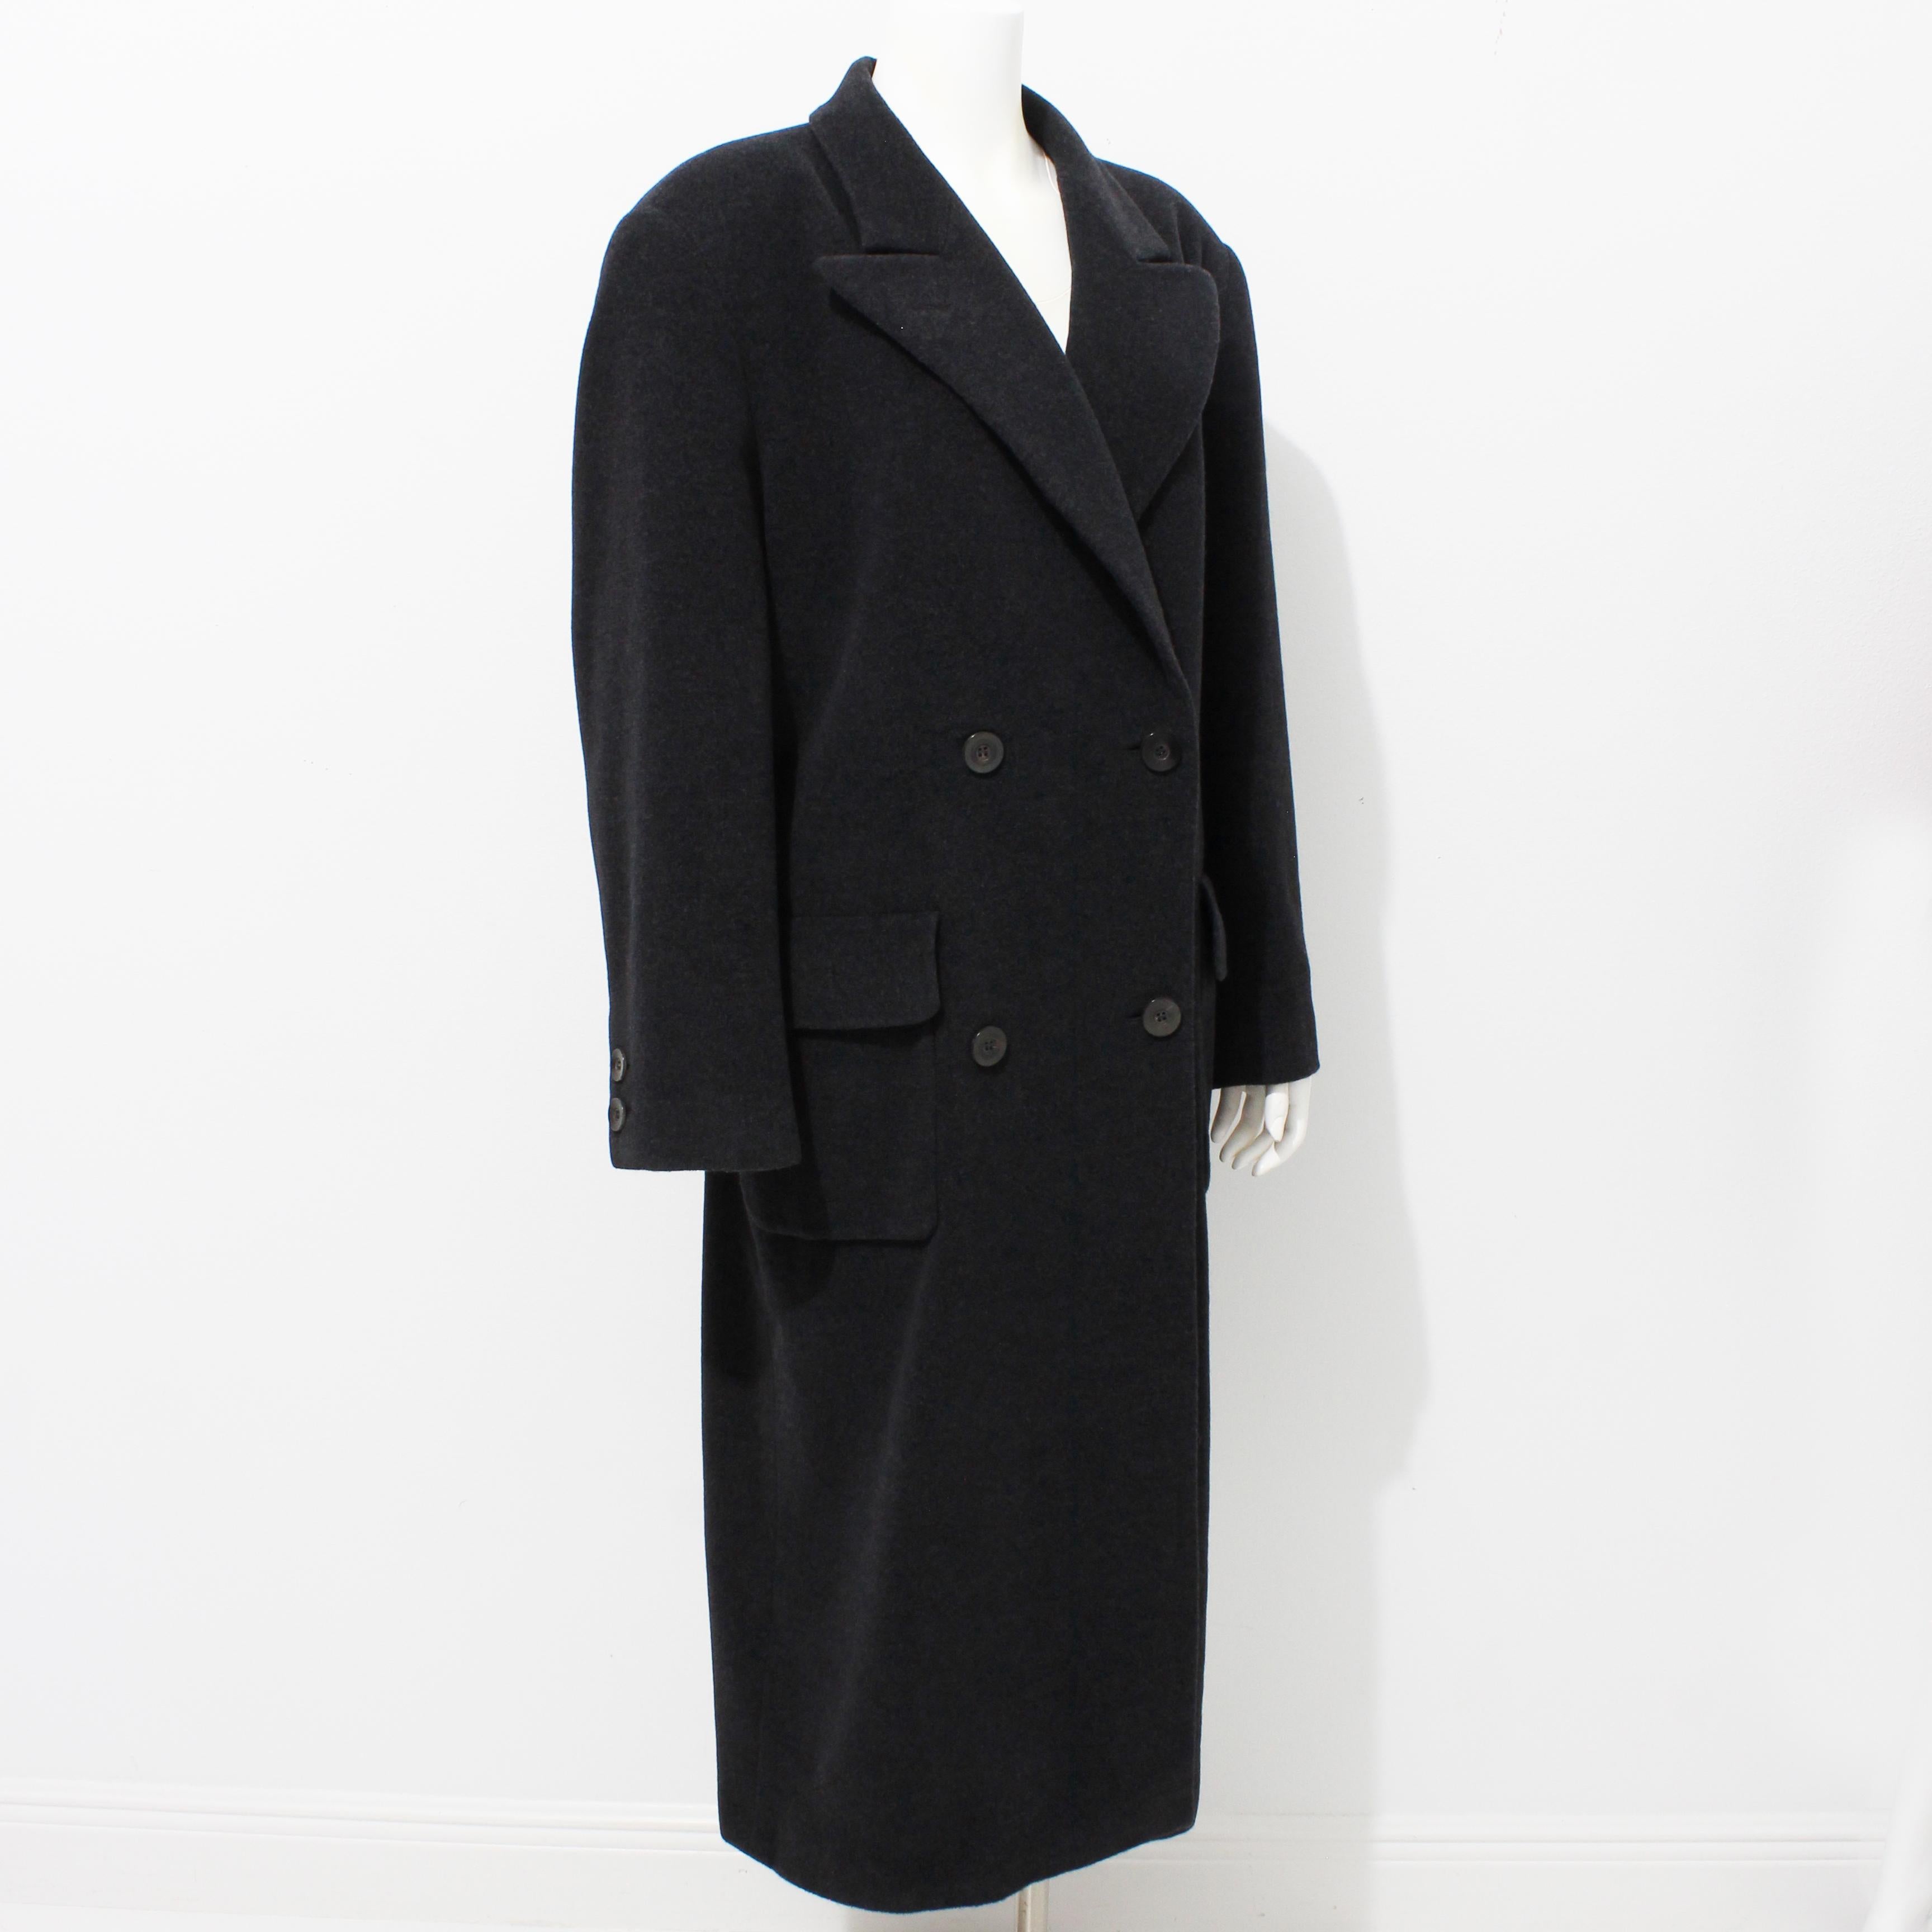 Authentic, preowned, vintage Escada coat, likely made in the 90s. Made from 100% Pure New Wool in a charcoal gray hue, it features double-breasted construction with flap pockets at each hip and a faux belt in back.   

An iconic style and